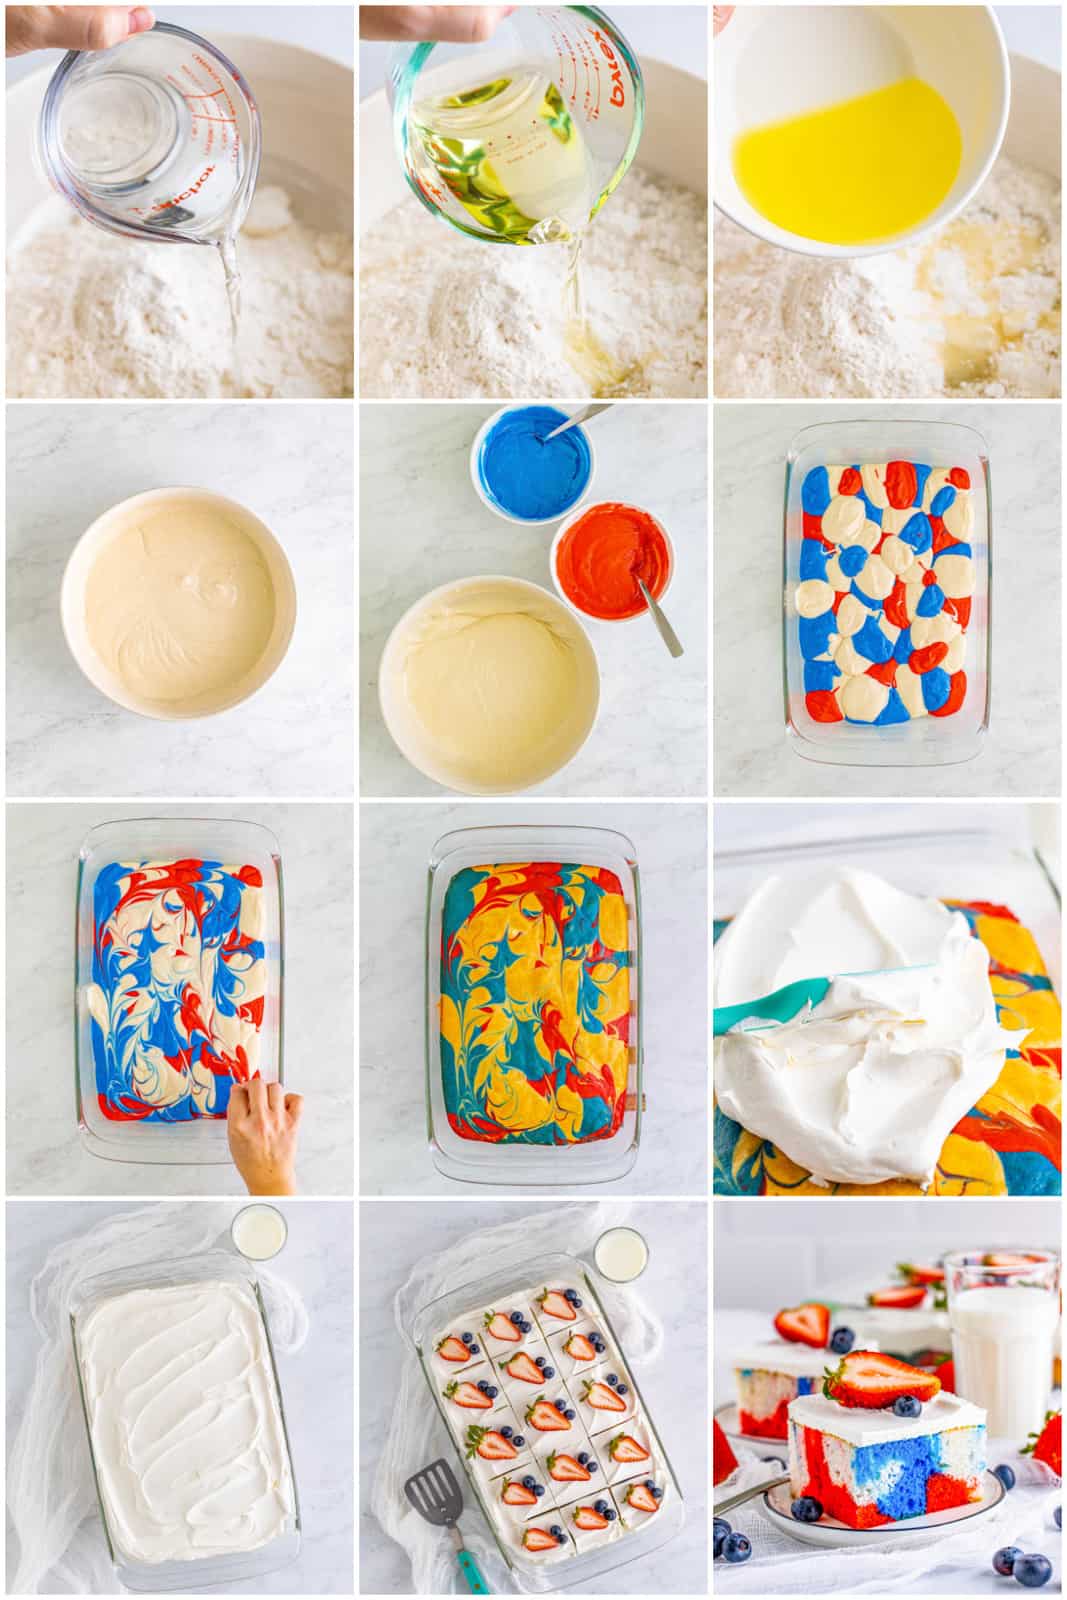 Step by step photos on how to make a Tie Dye 4th of July Cake.